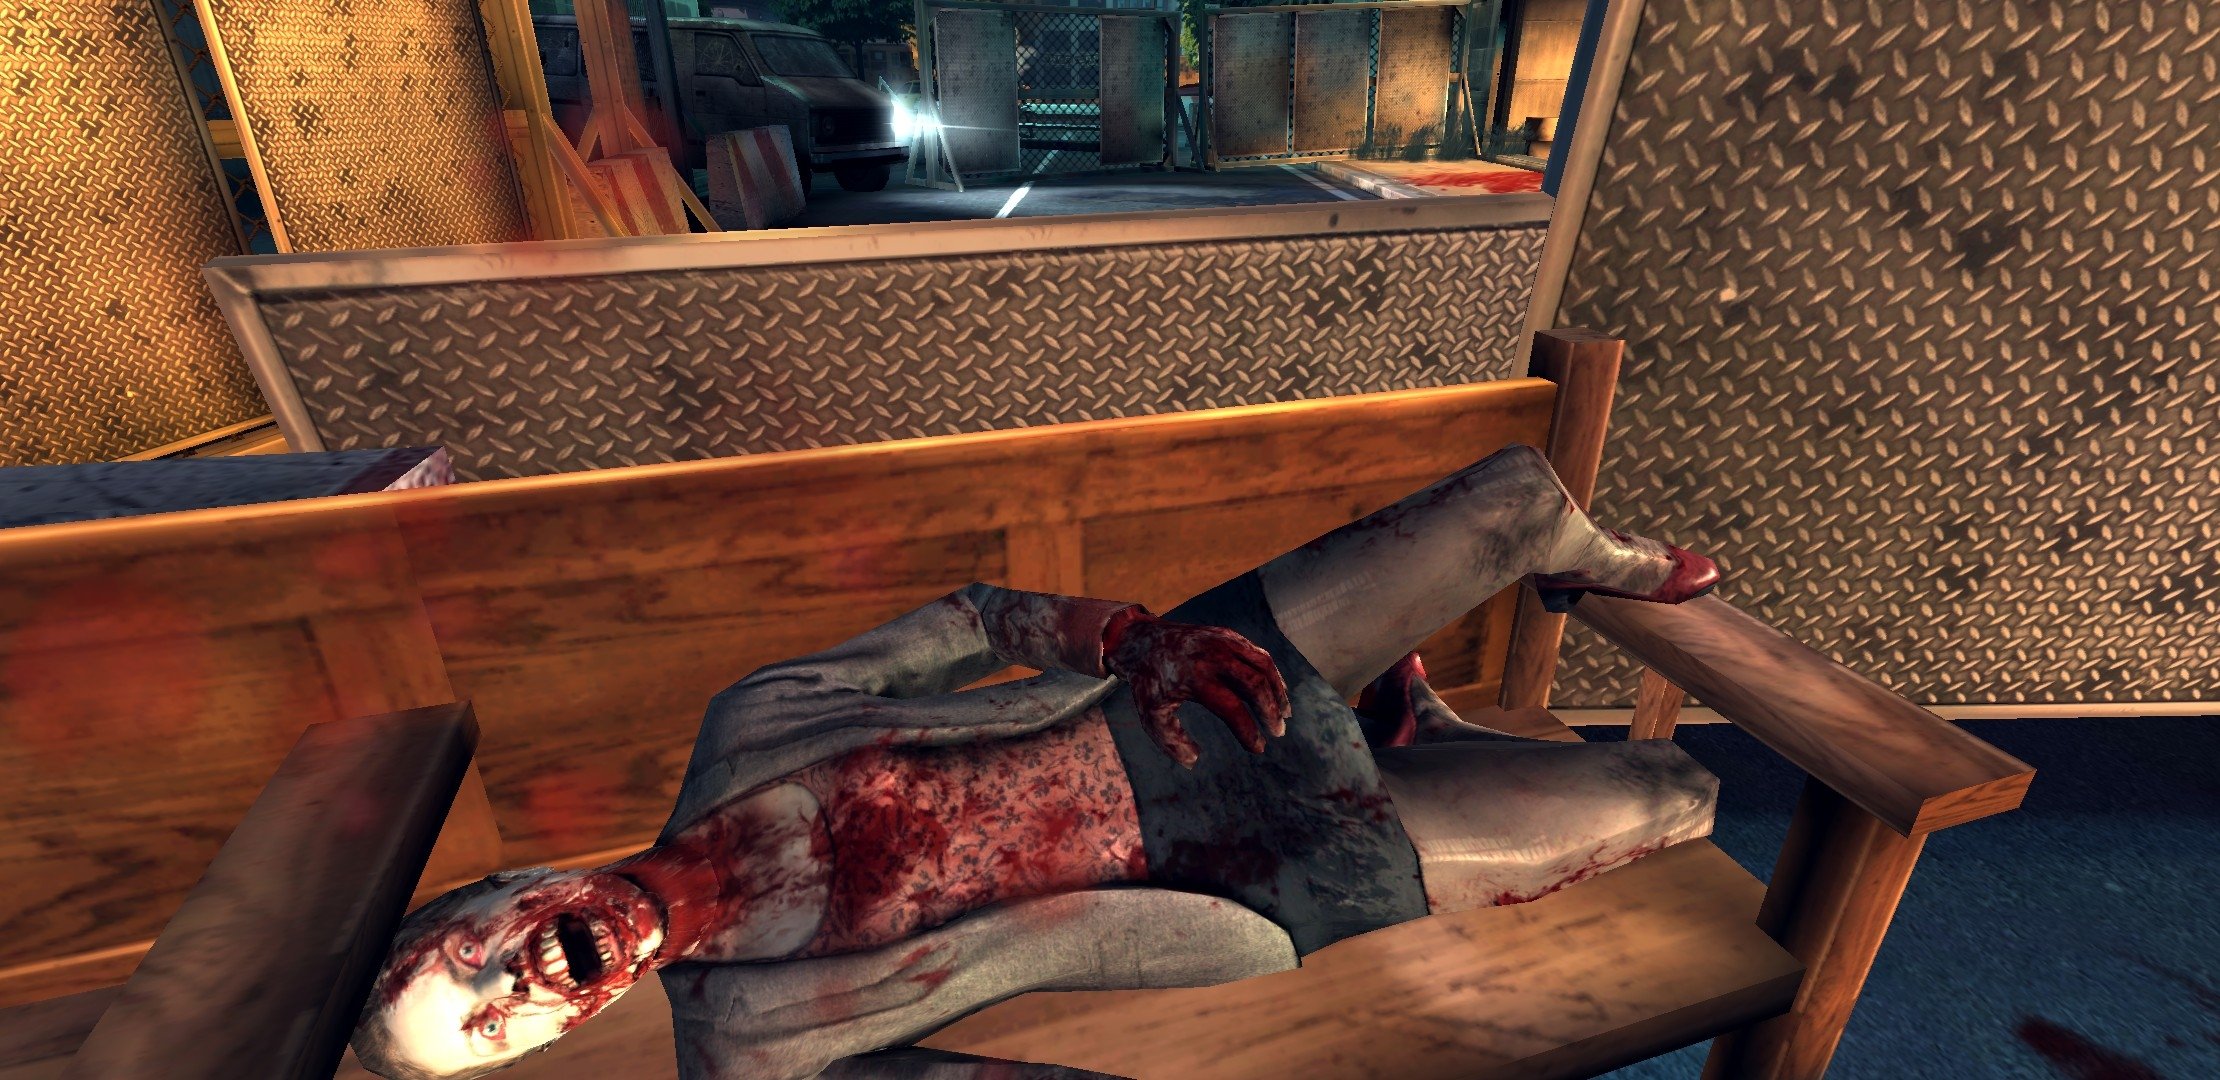 Dead Trigger 2 Free Download For Android